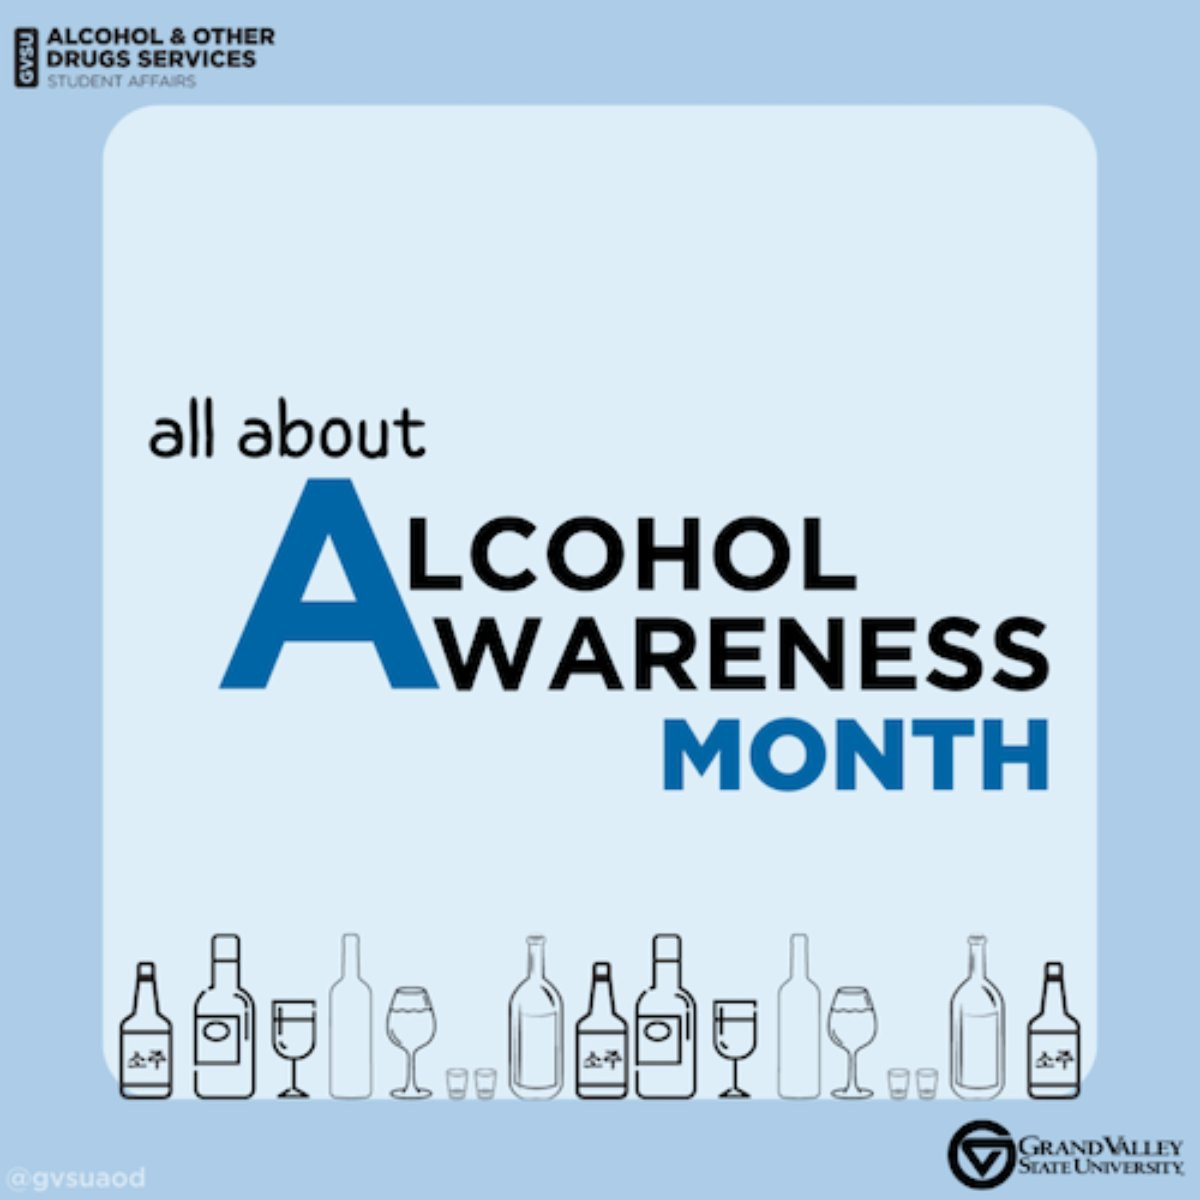 A bunch of alcohol bottles and glass on the bottom with text that says All About Alcohol Awareness Motnh